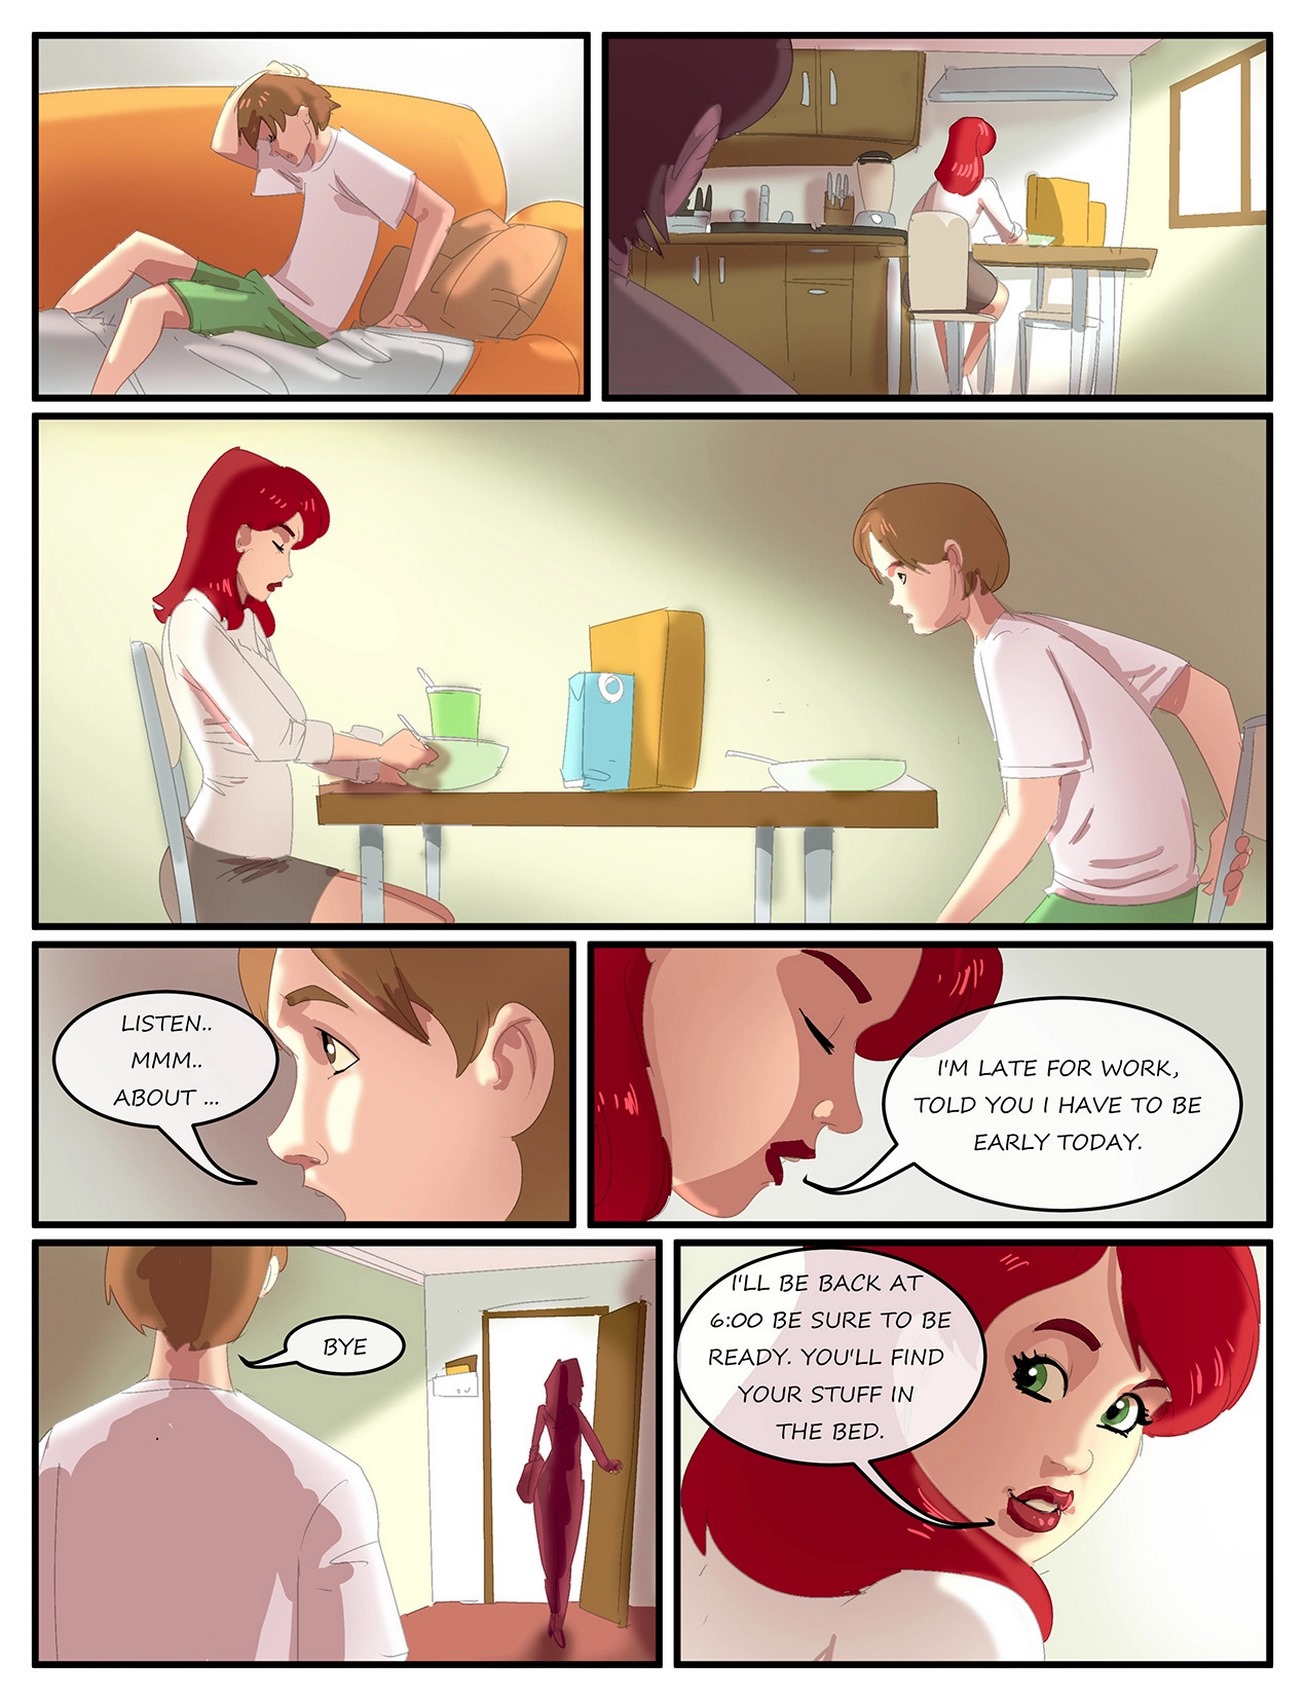 Home Alone And Discovering By Jackysis Porn Comics